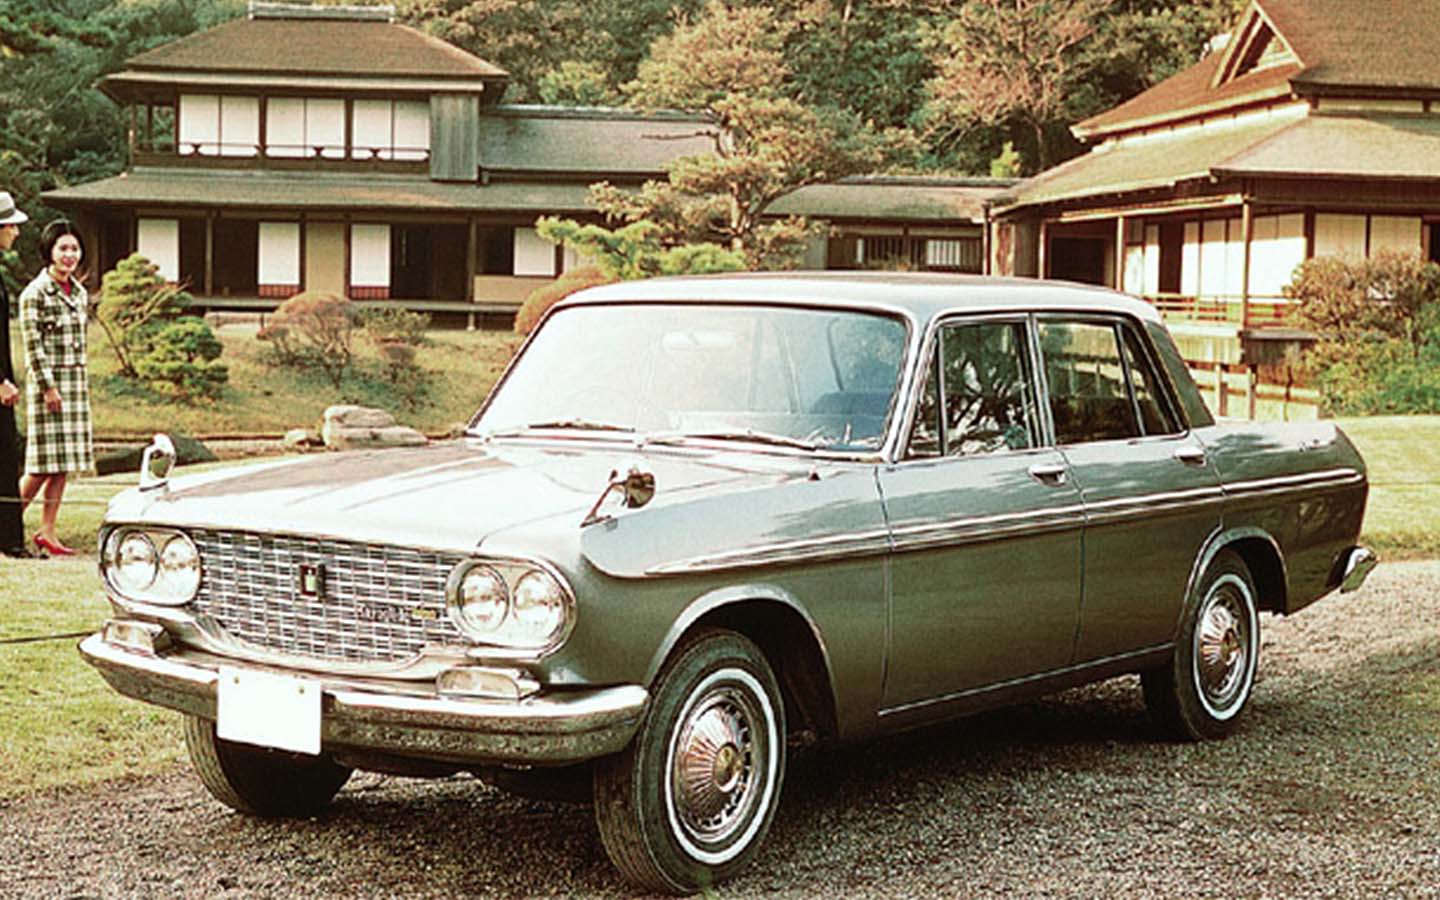 4 lamp headlight was introduced in second generation Toyota Crown 1962